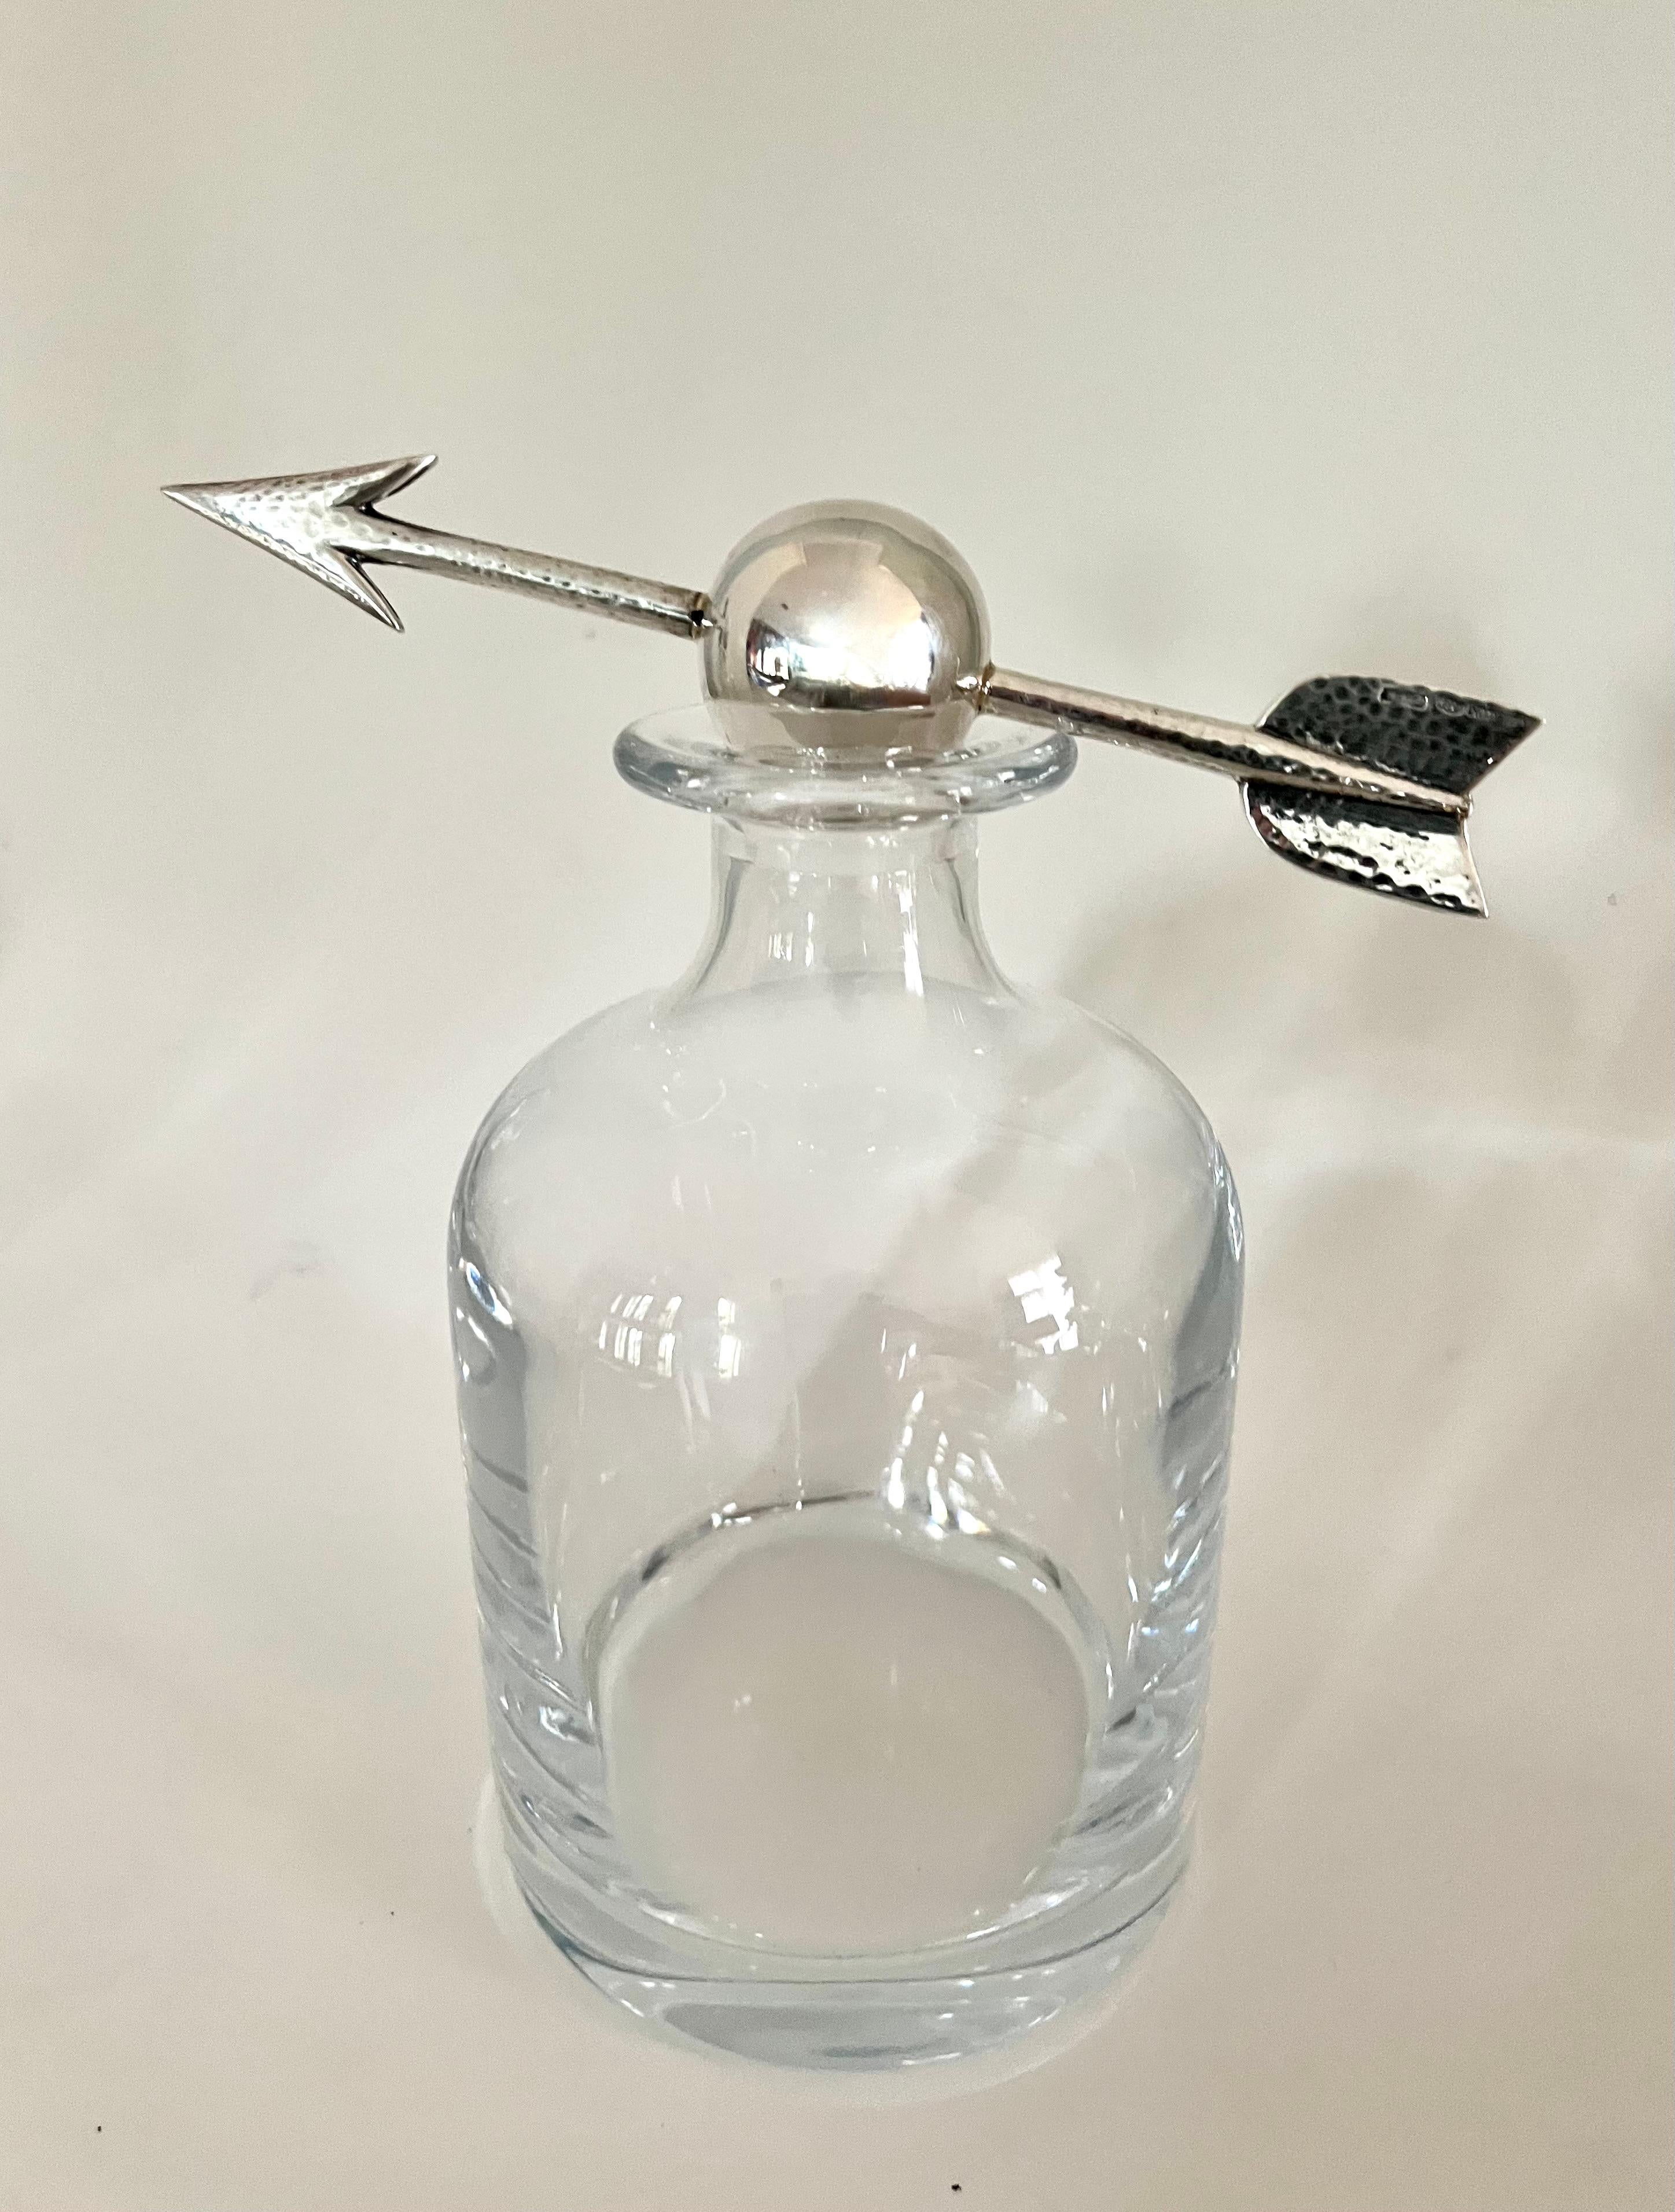 20th Century Crystal Italian Pampaloni Decanter with Hammered Silver Ball and Arrow Stopper